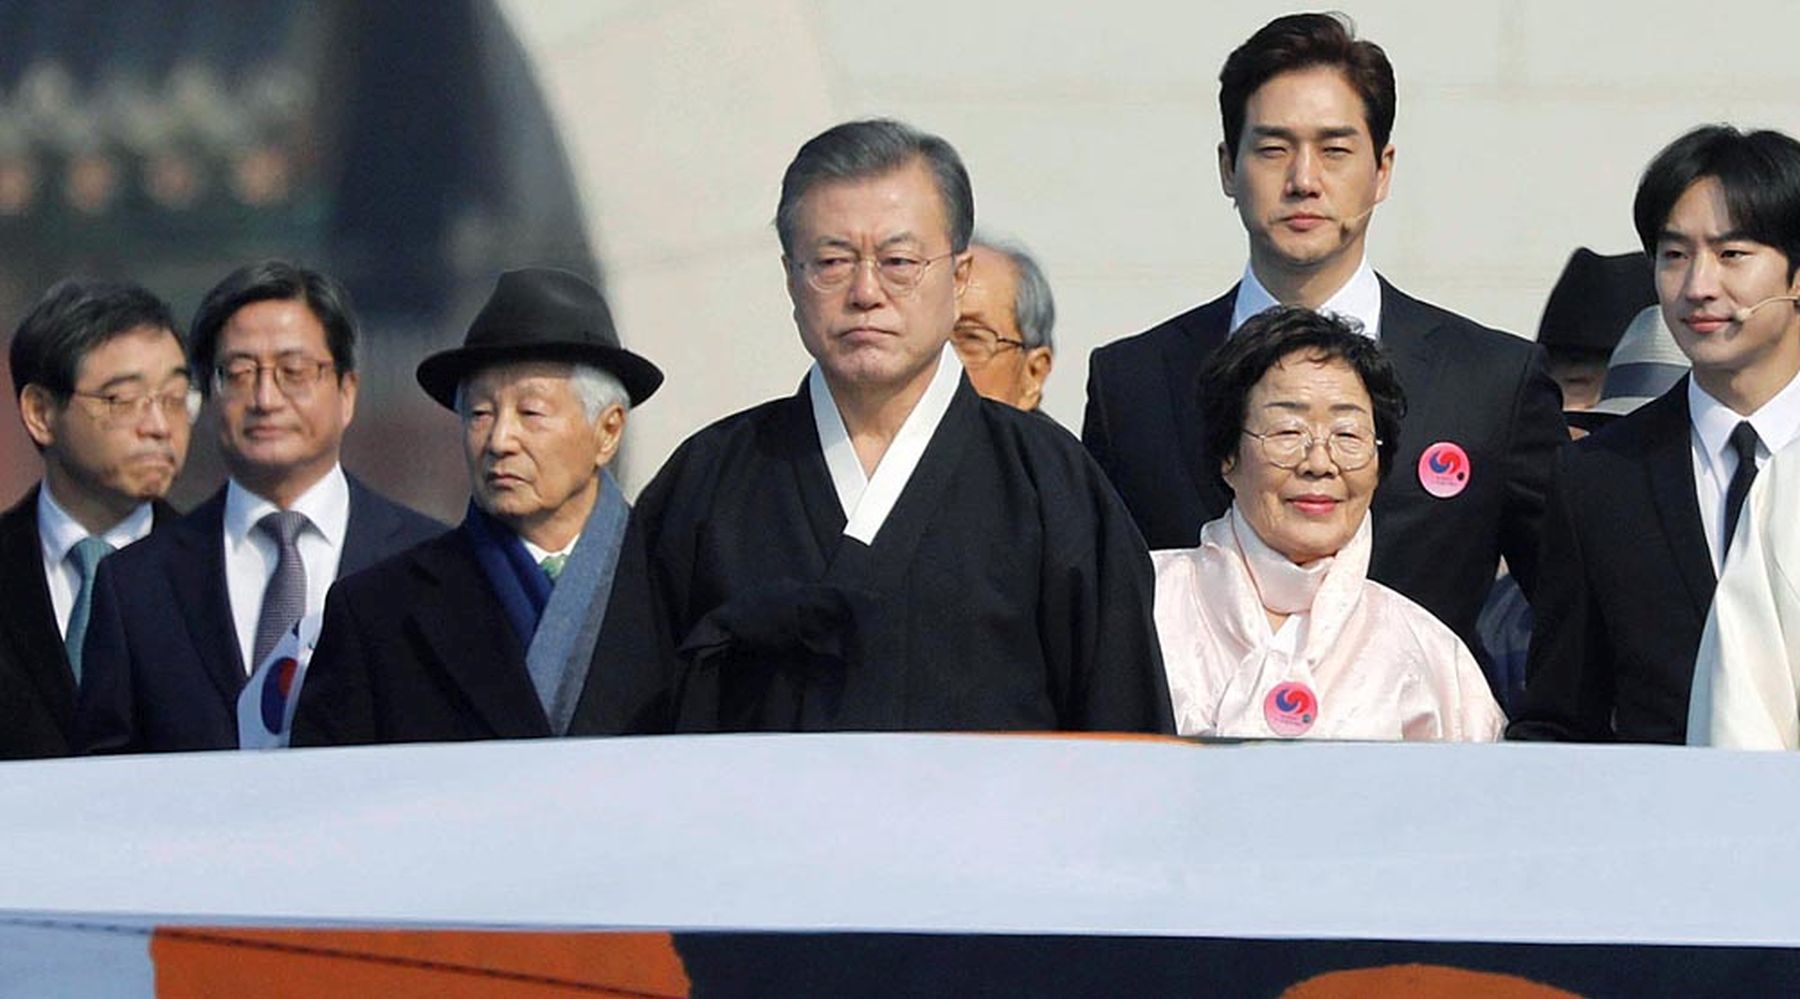 South Korean President Moon and others attend a ceremony celebrating the 100th anniversary of the March First Independence Movement against Japanese colonial rule in central Seoul